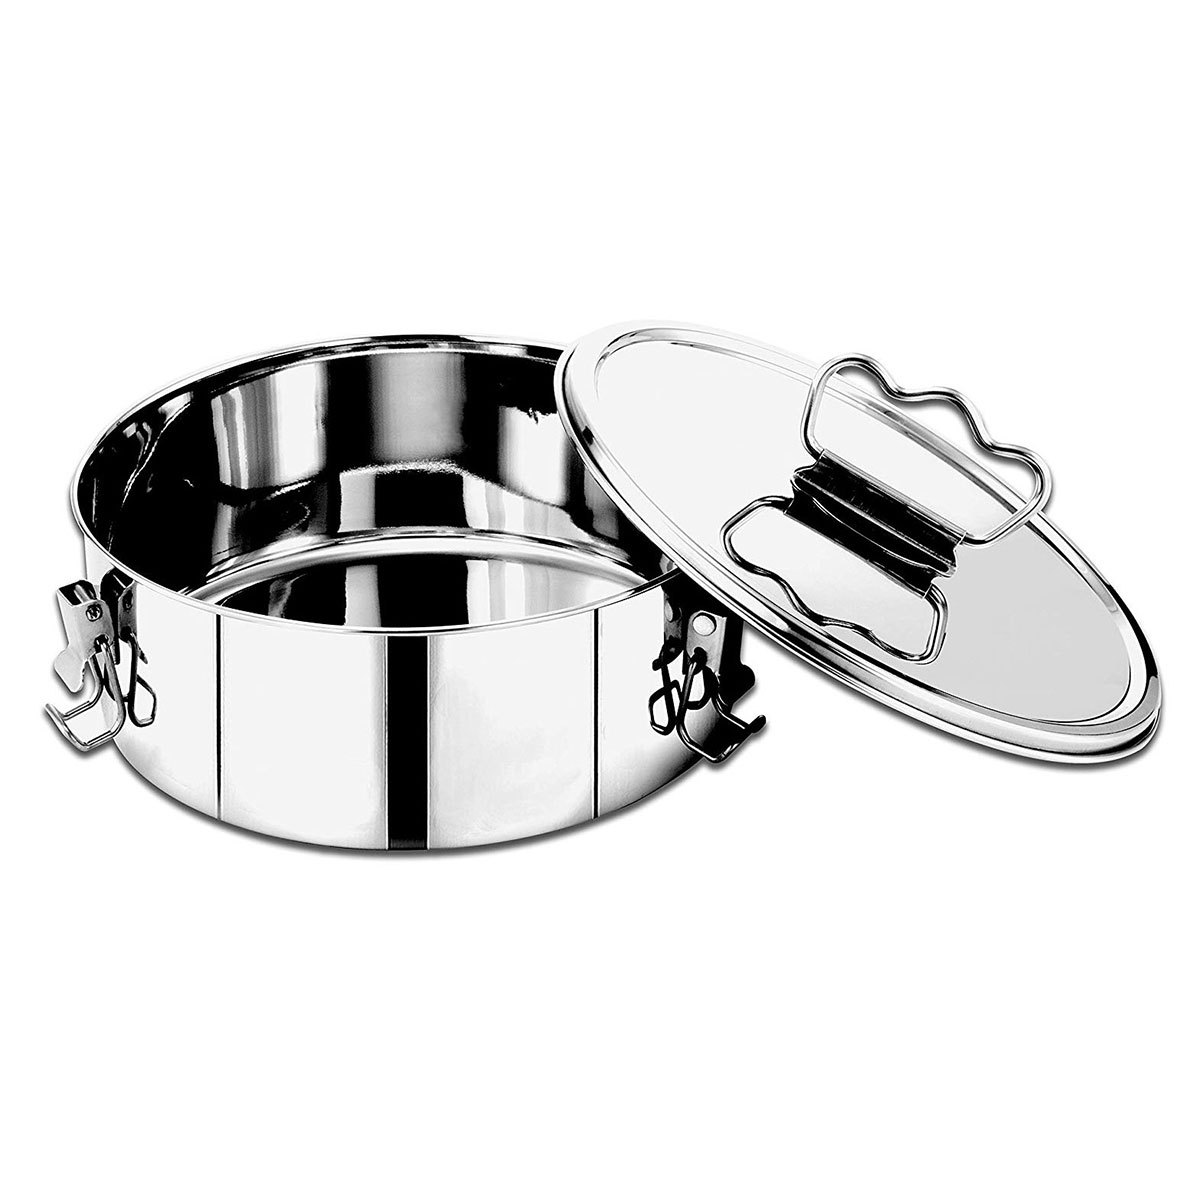 1.5QT Capacity Flanera Flan Maker - Stainless Steel Portable Round Cake  Baking Pan With Lid & Handle - Perfect For Chocolate Cake, Cupcake &  Pudding B